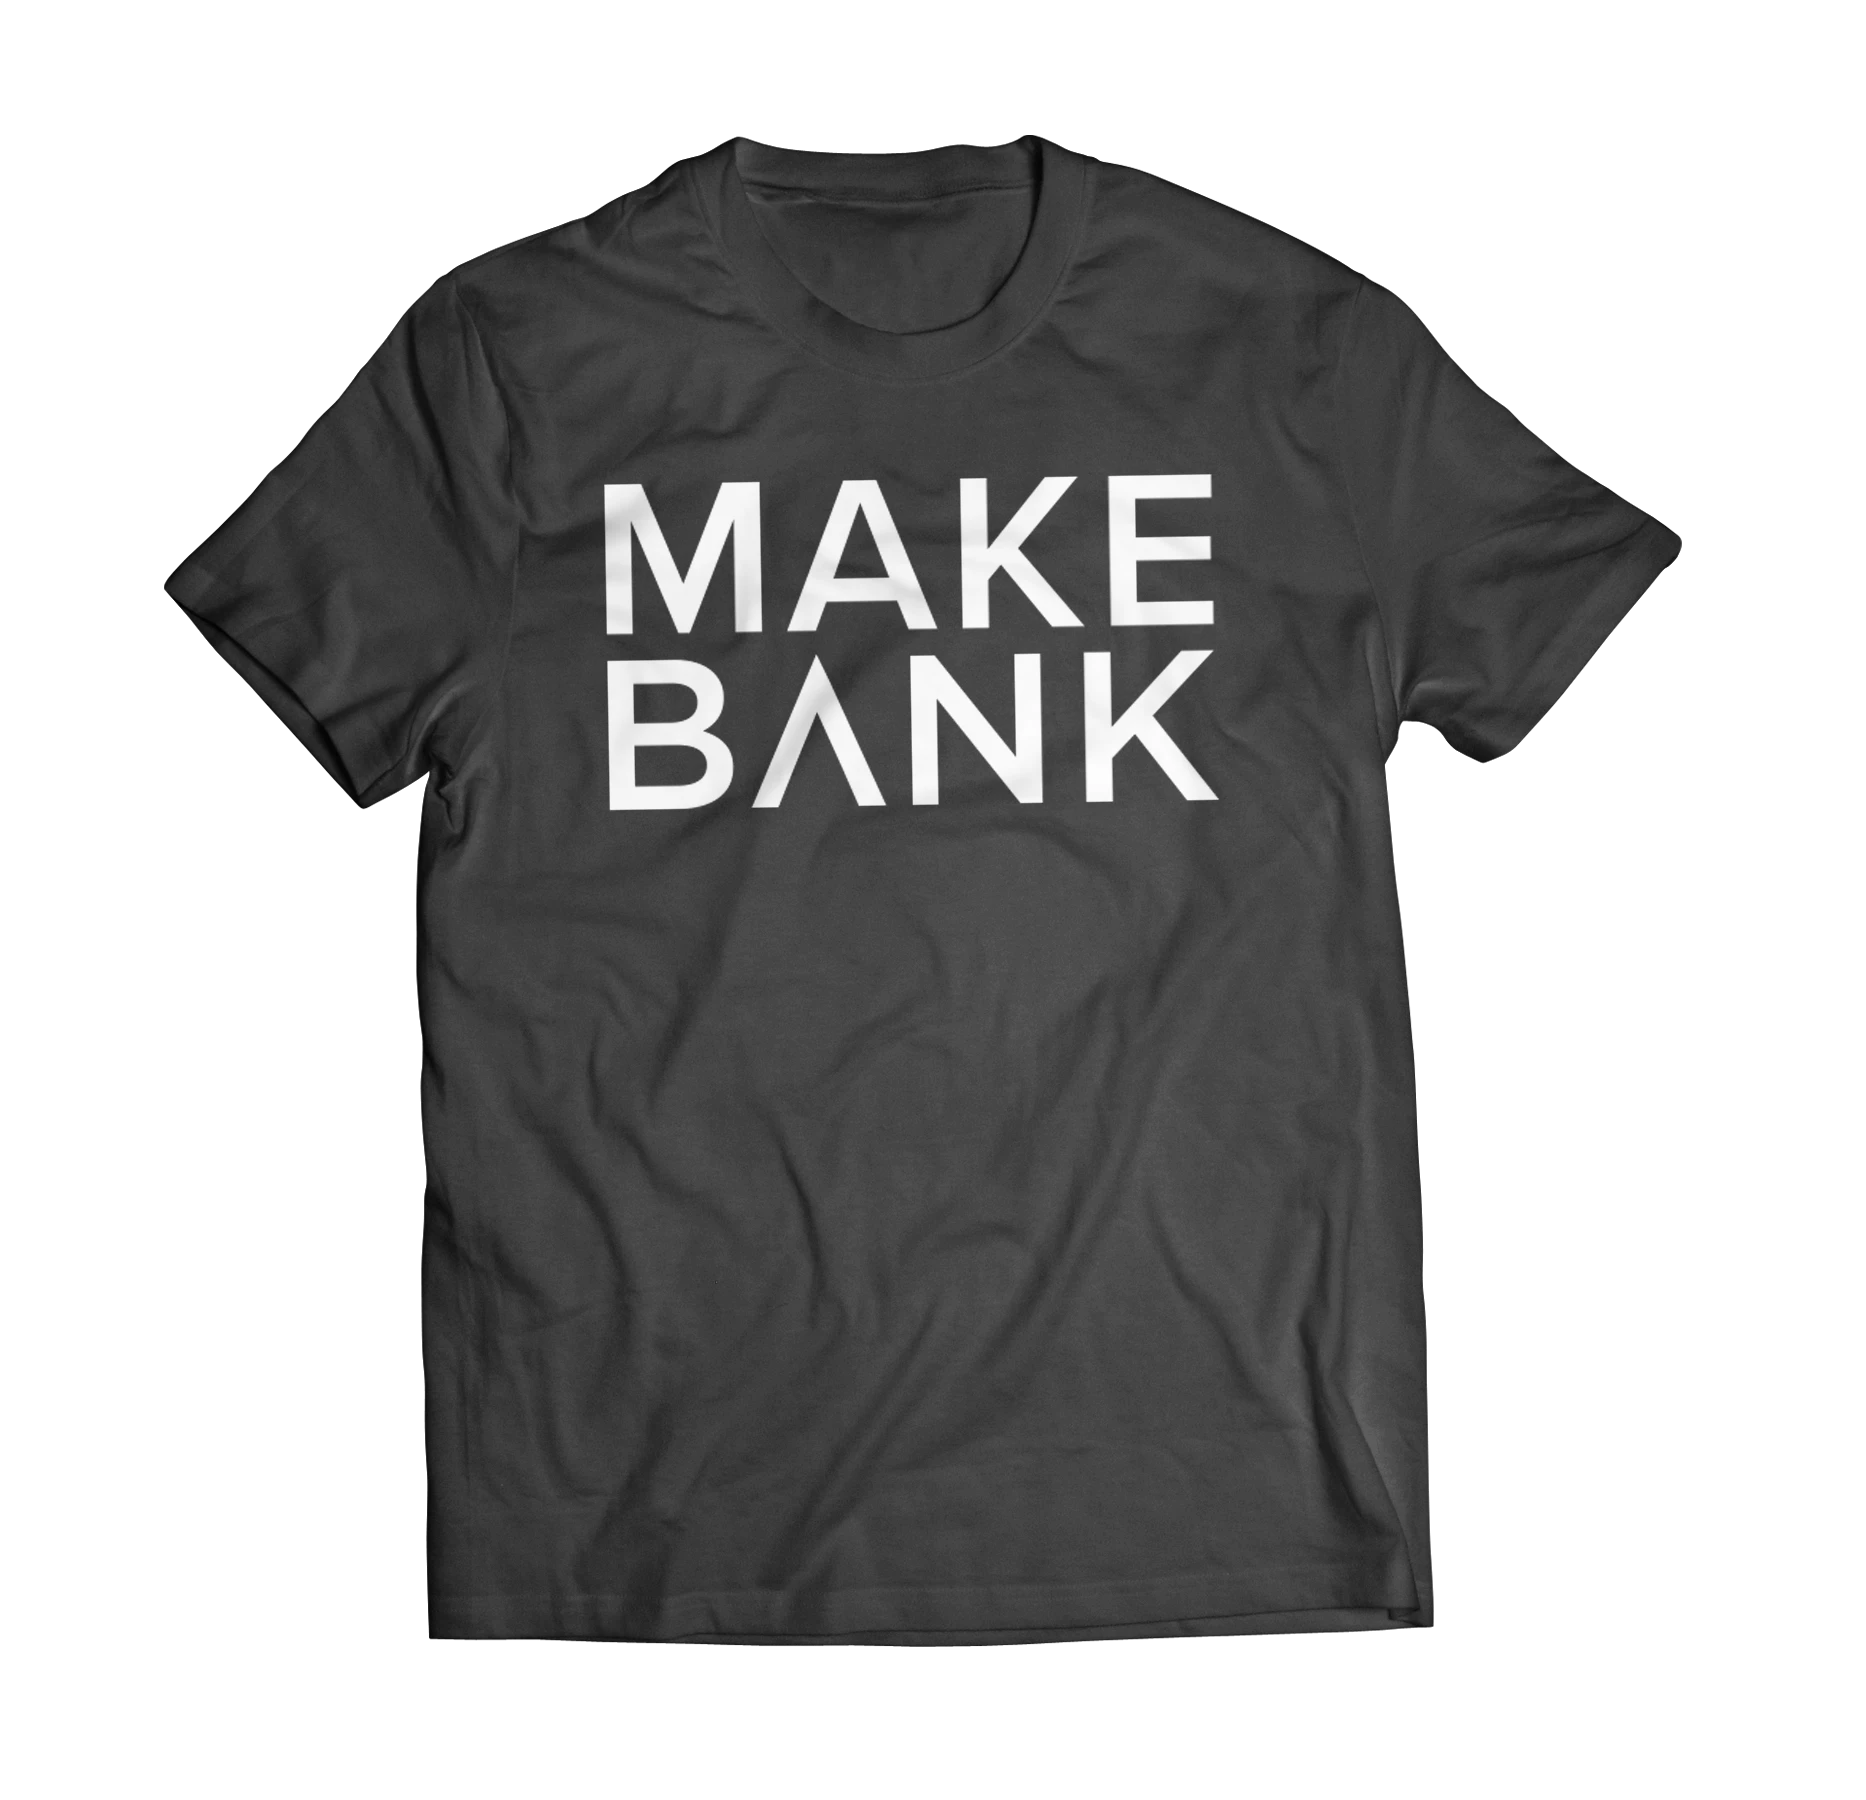 ClickBank Grey Make Bank Tee (White Letters)